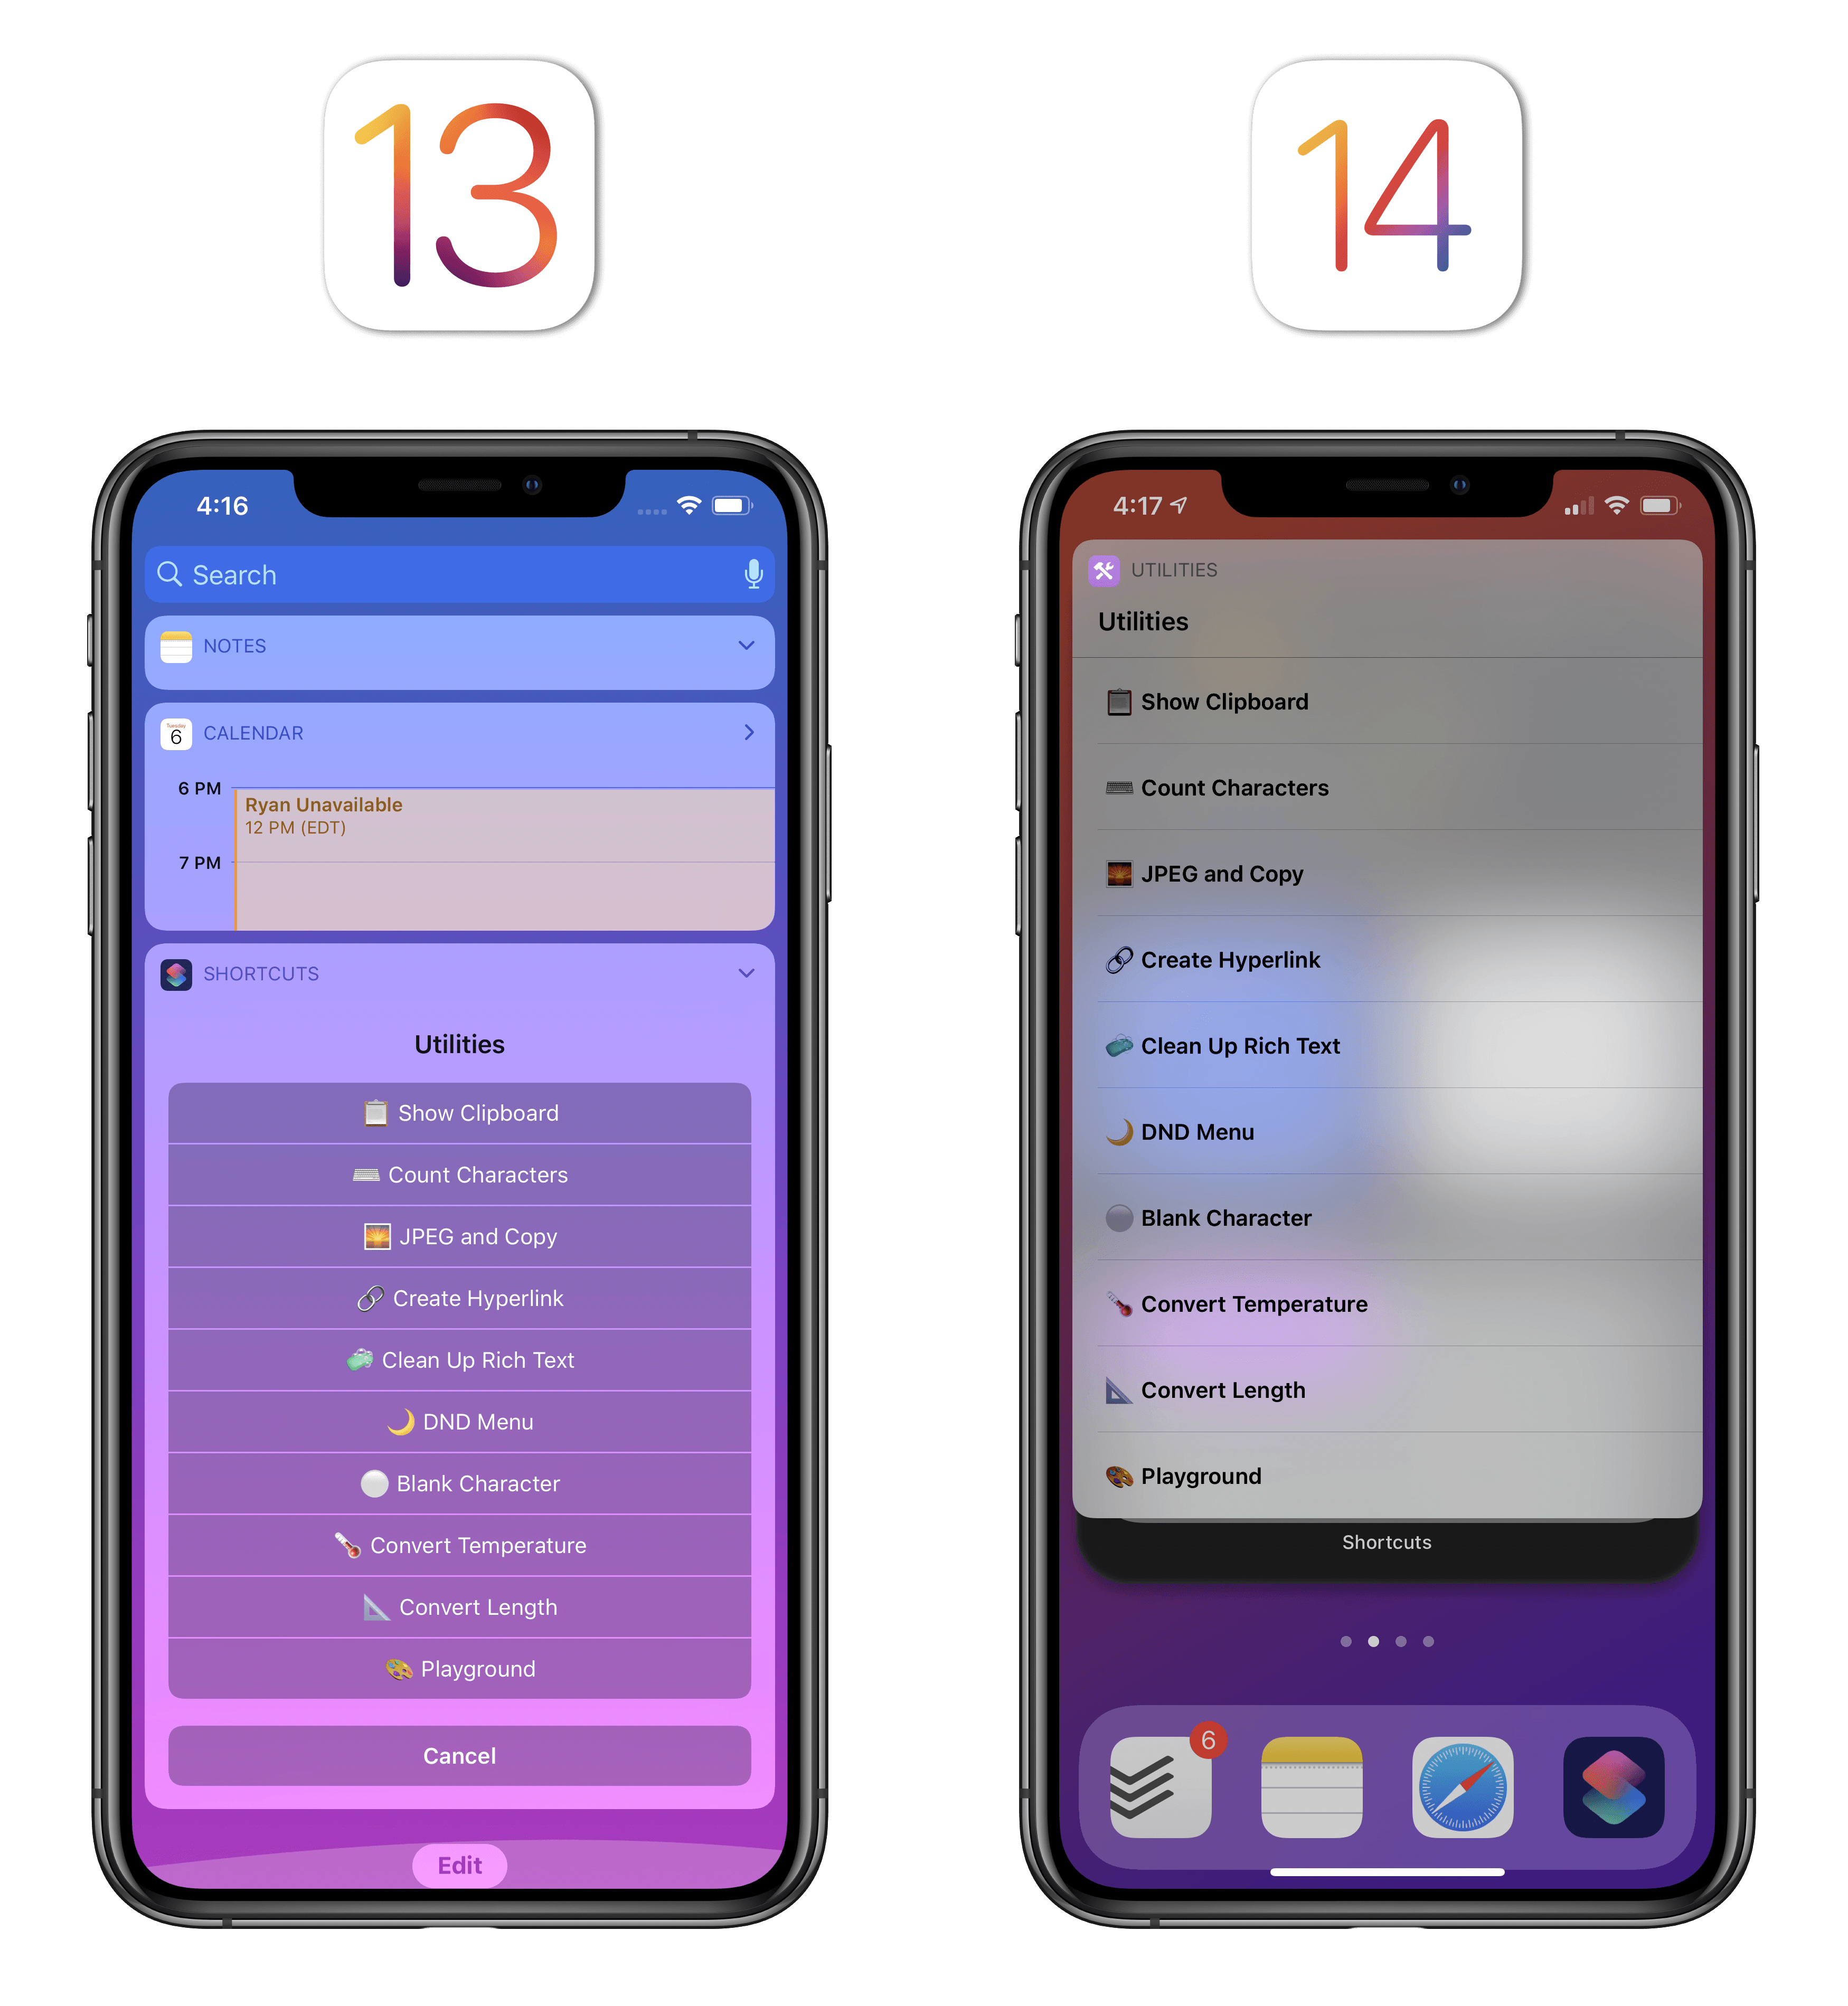 In iOS 14, you can run shortcuts from anywhere on the Home Screen with compact UI.